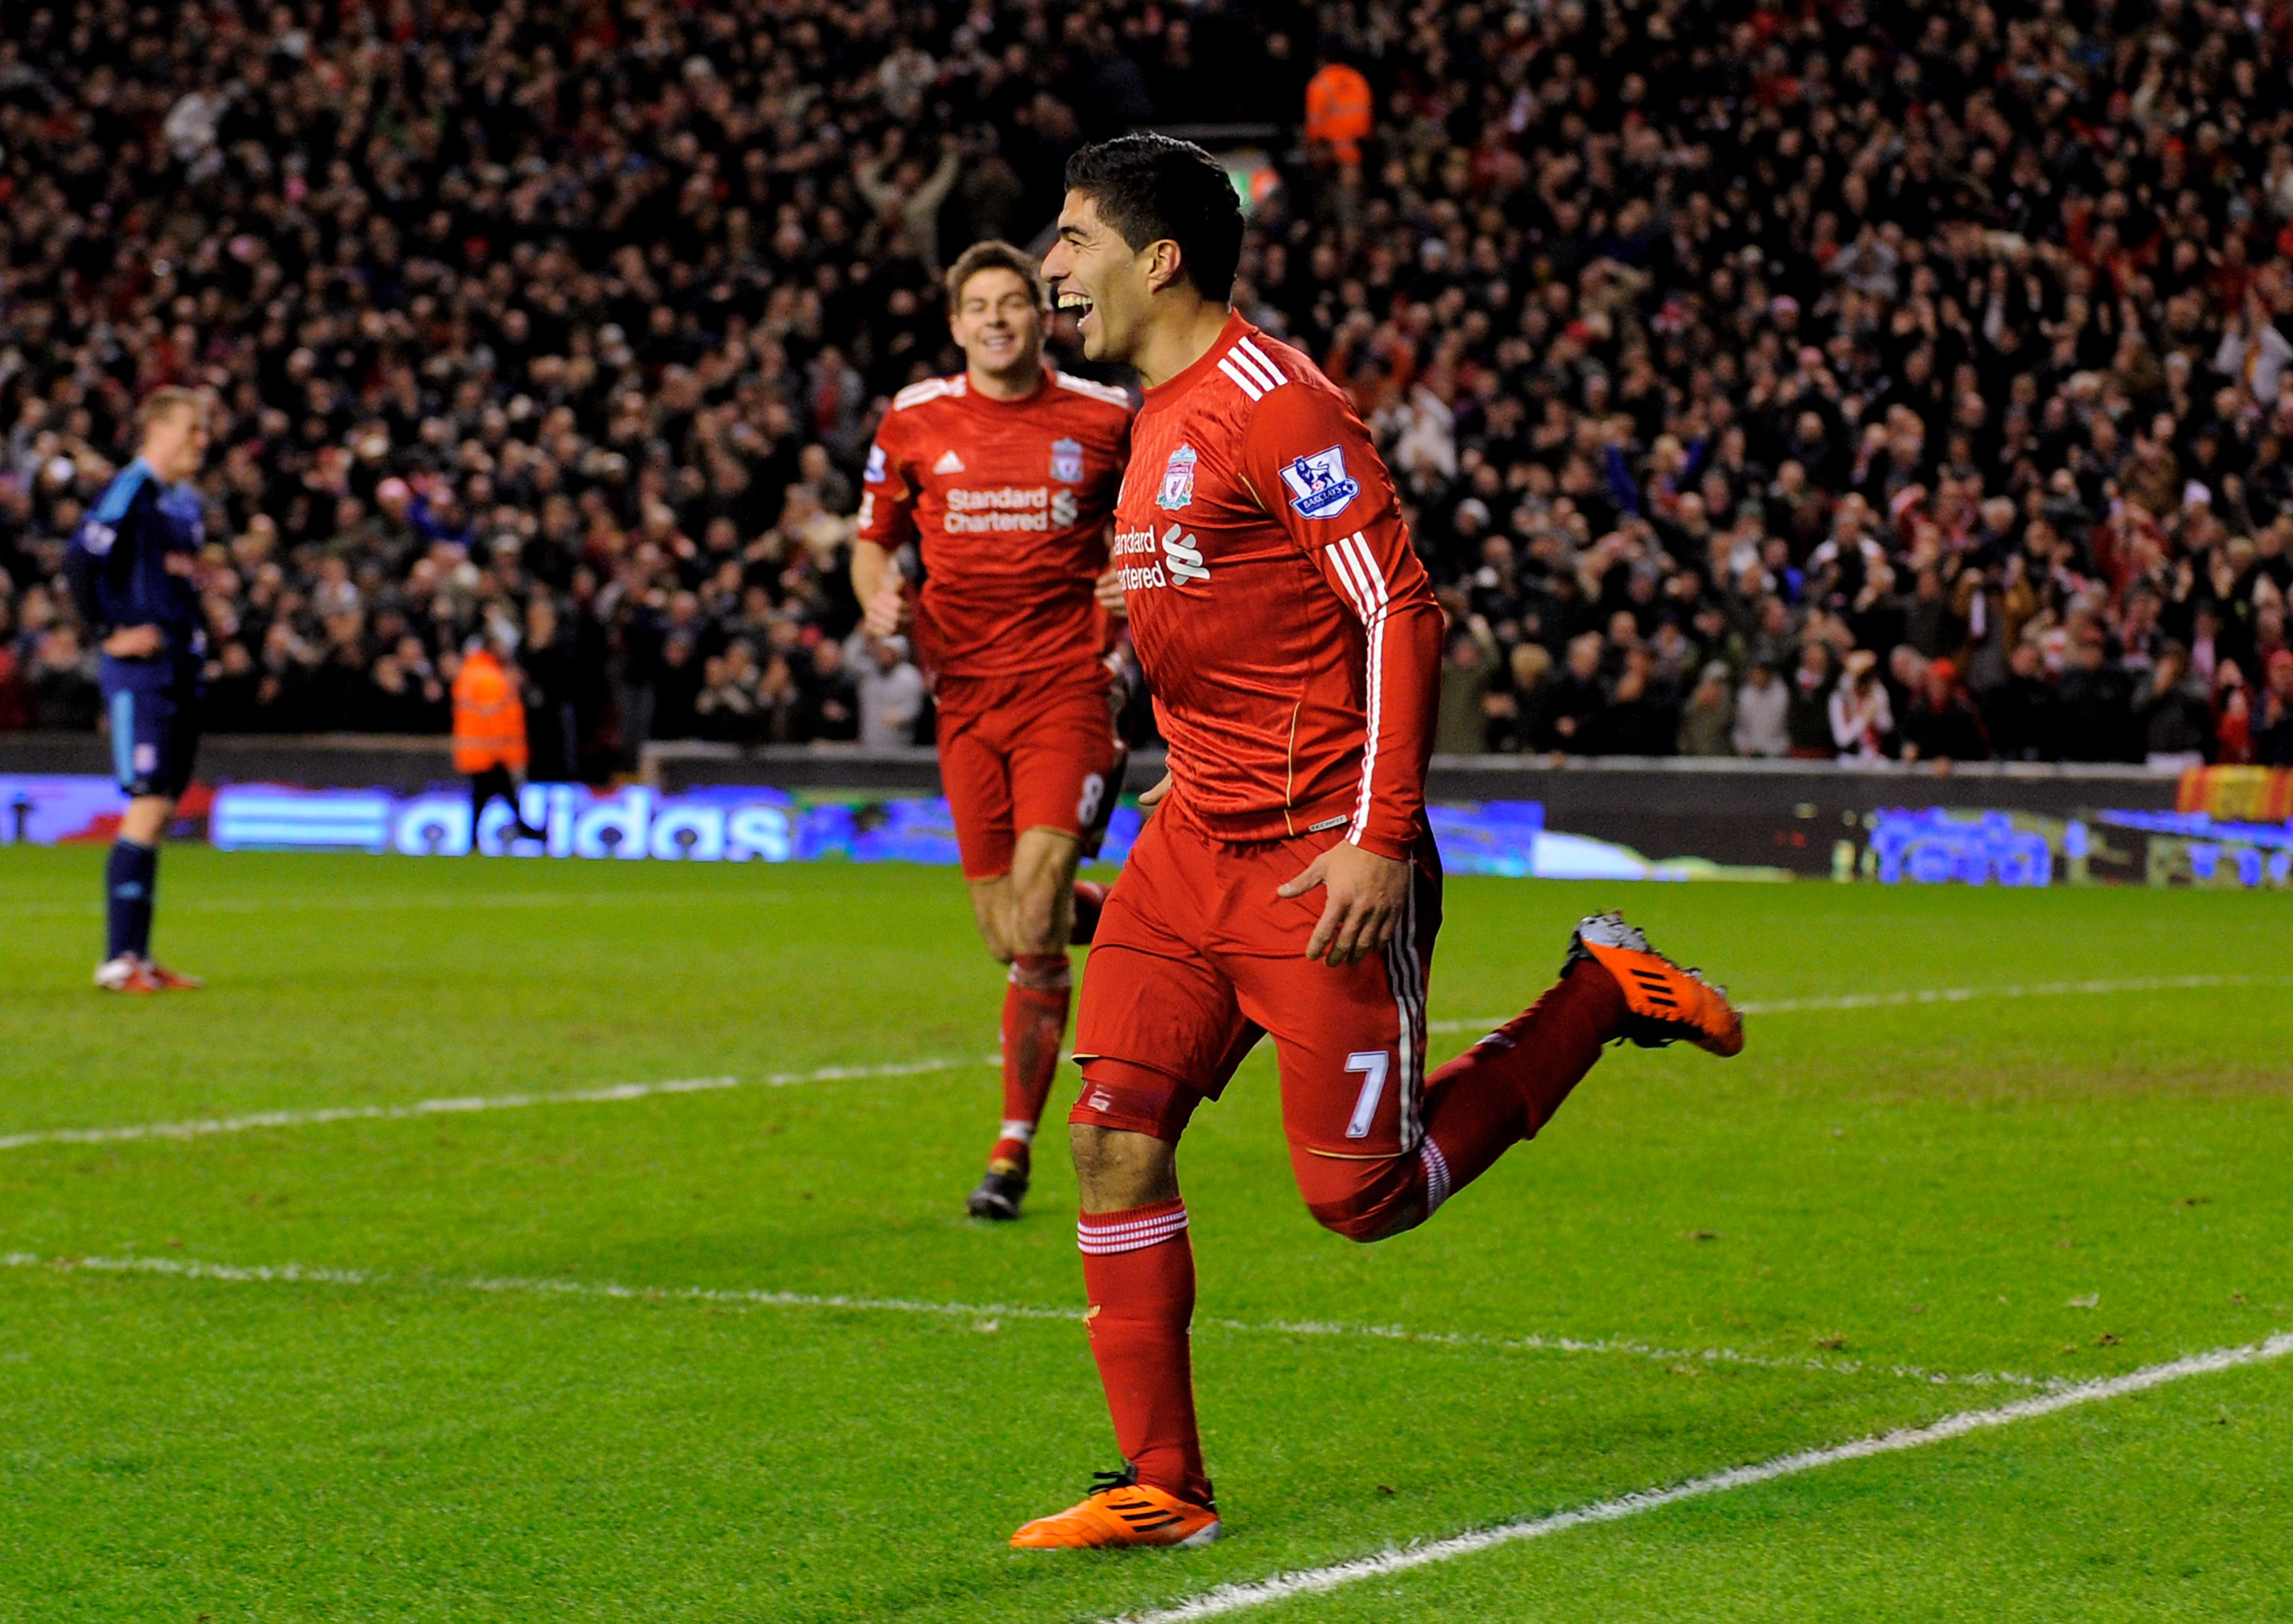 LIVERPOOL, ENGLAND - FEBRUARY 02: Luis Suarez of Liverpool celebrates after scoring the 2-0 goal during the Barclays Premier League match between Liverpool and Stoke City at Anfield on February 2, 2011 in Liverpool, England. (Photo by Michael Regan/Getty